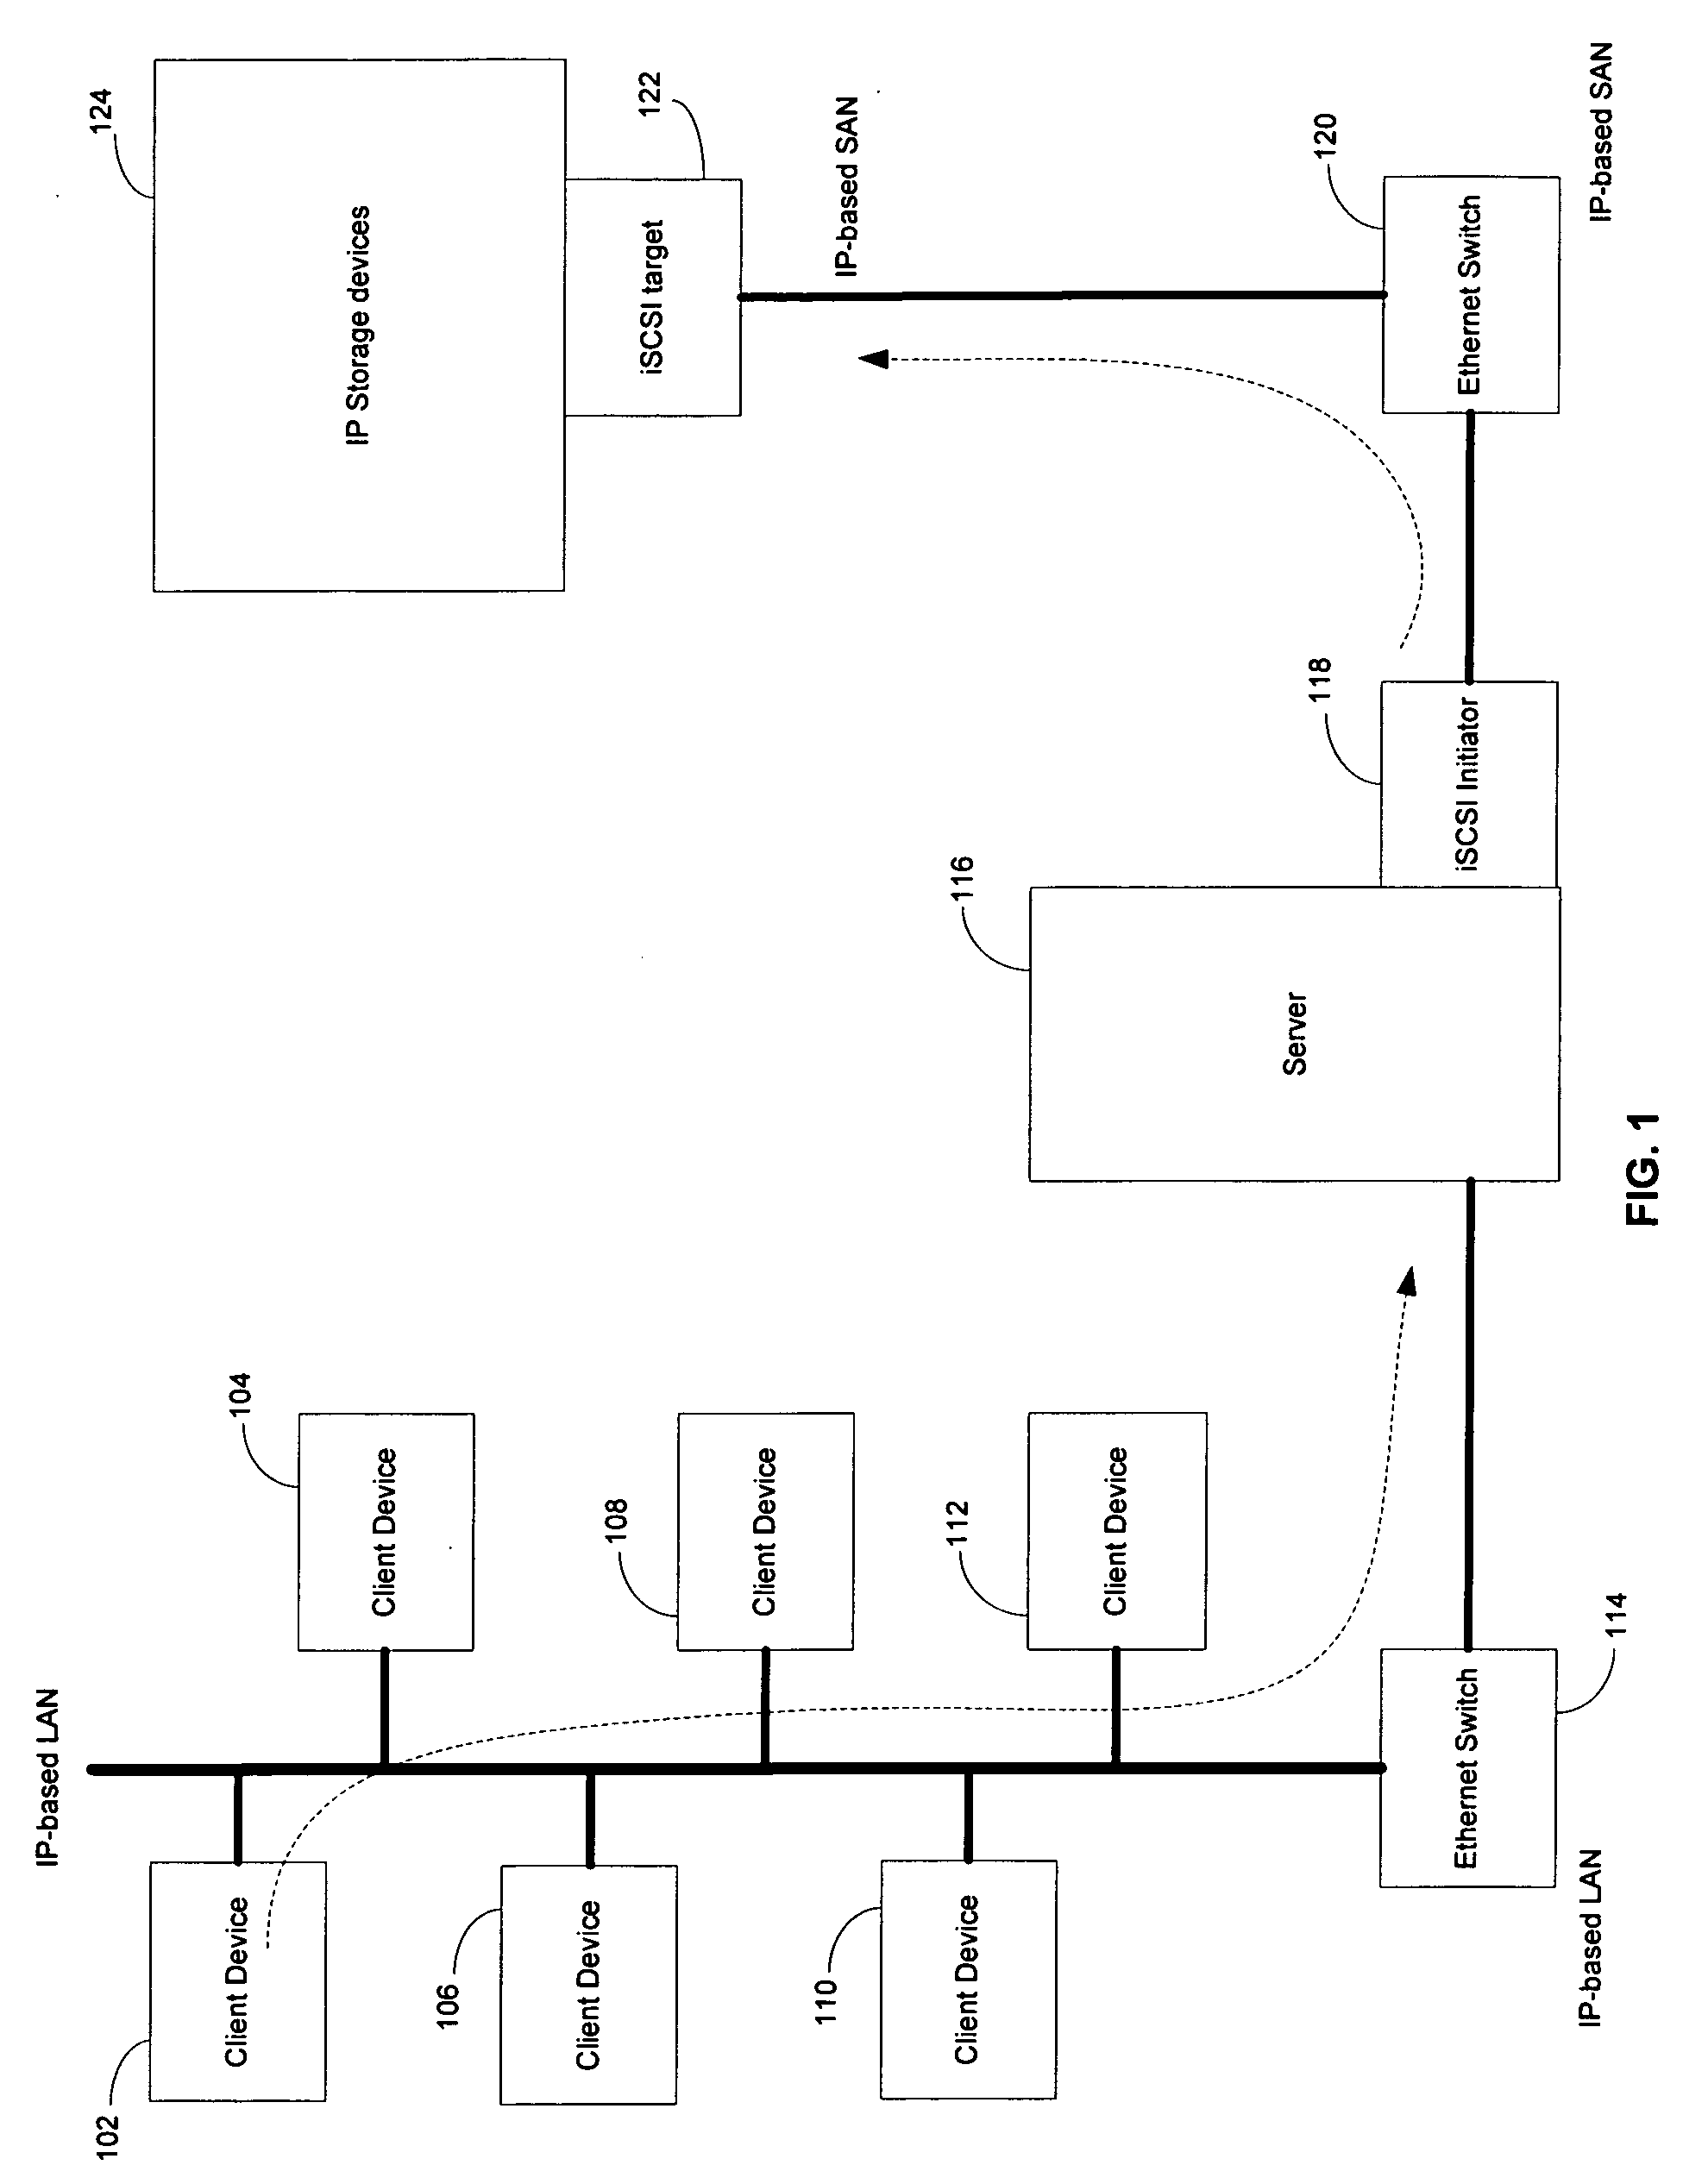 Method and system for supporting write operations for iSCSI and iSCSI chimney